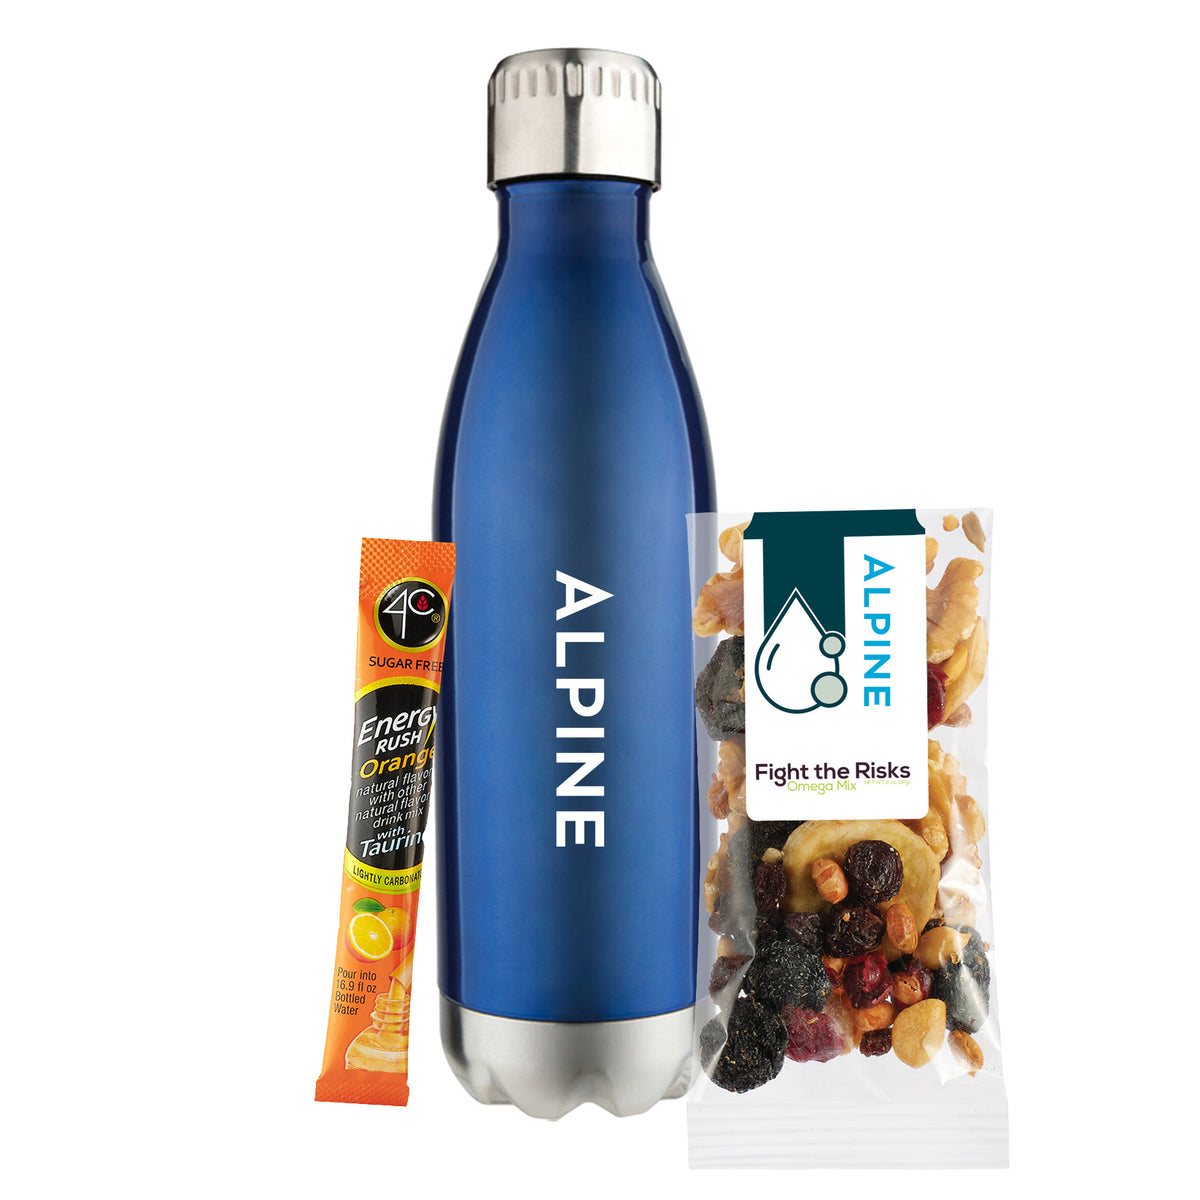 Water Bottle - 17 oz., 4C® Sugar Free Energy Rush Packet &amp; Snack Pack with Omega Mix